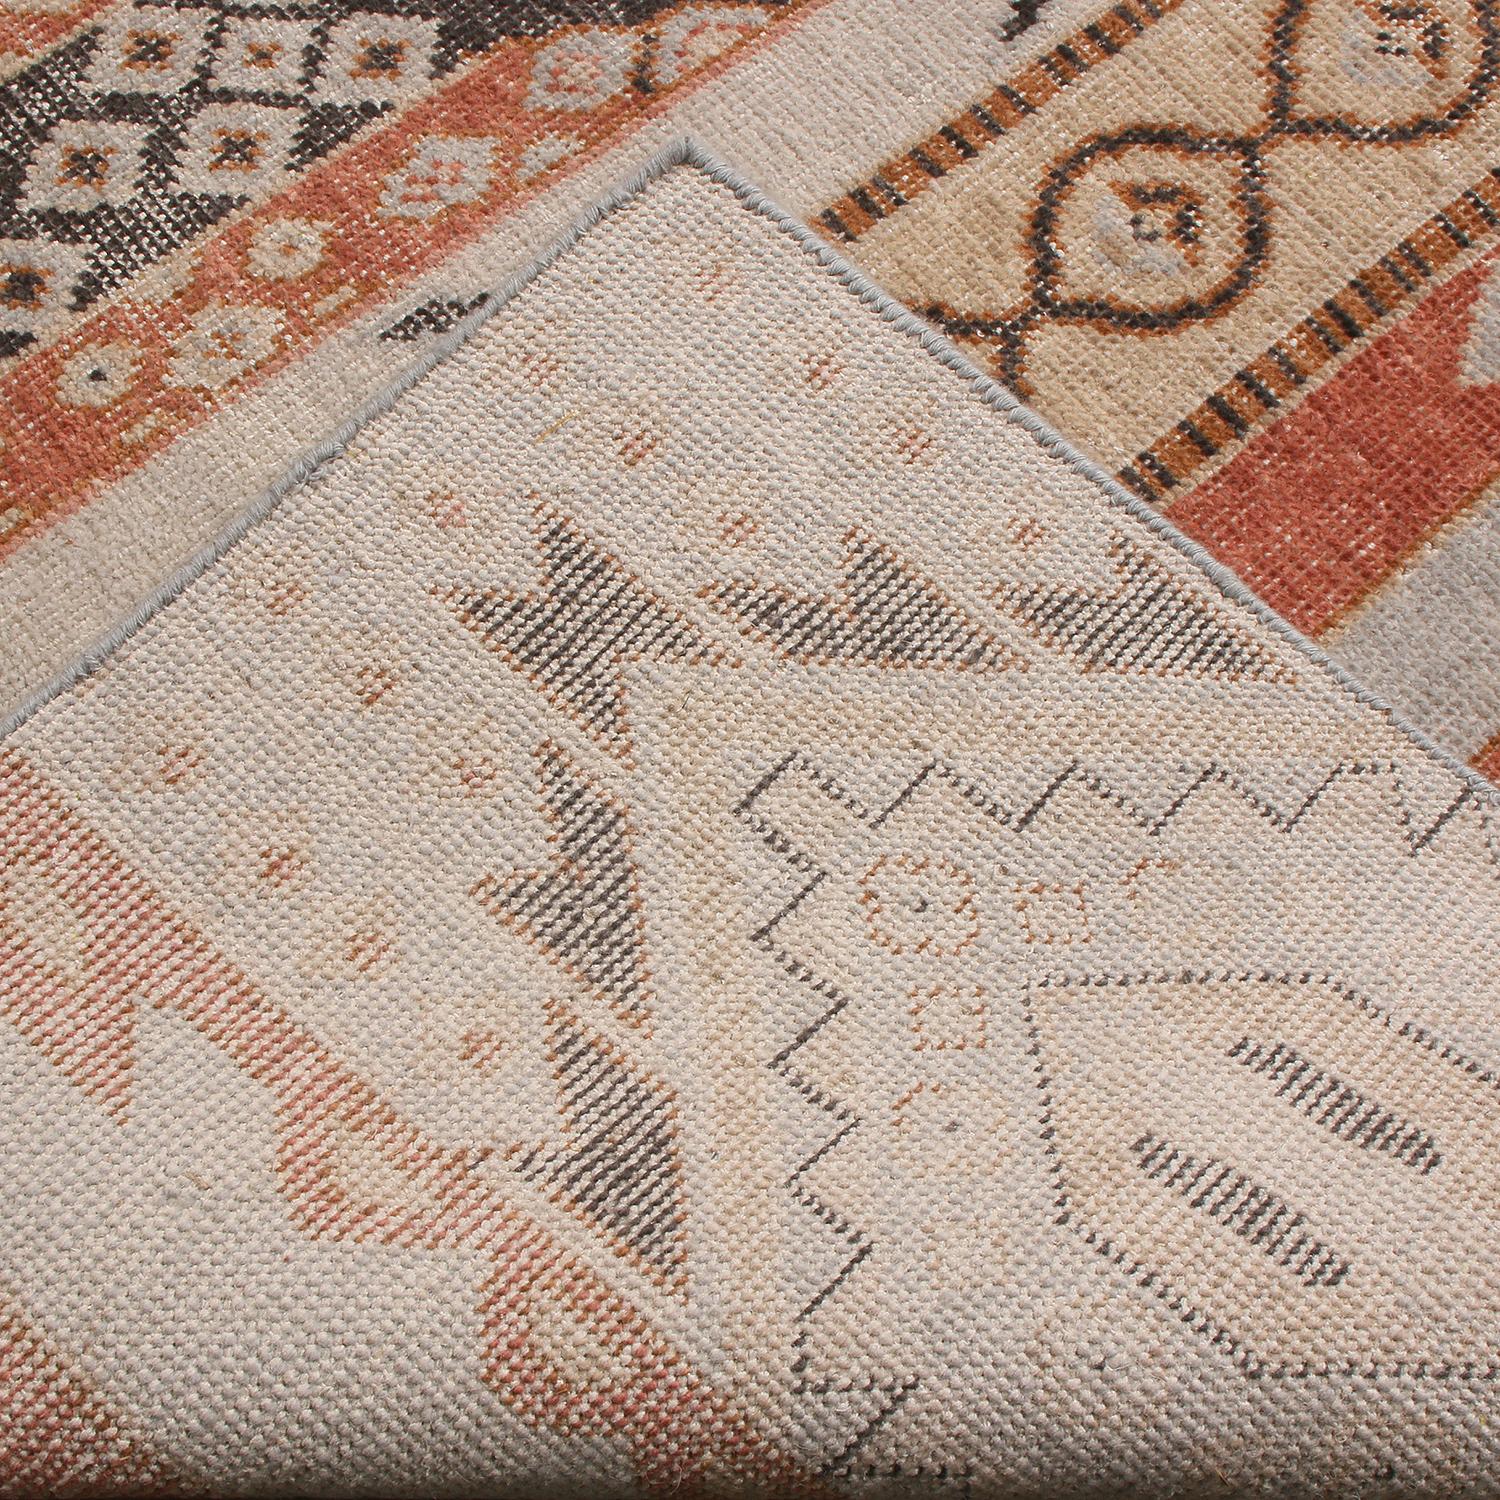 Hand-Knotted Rug & Kilim’s Beige Blue and Russet Red Wool Rug from the Homage Collection